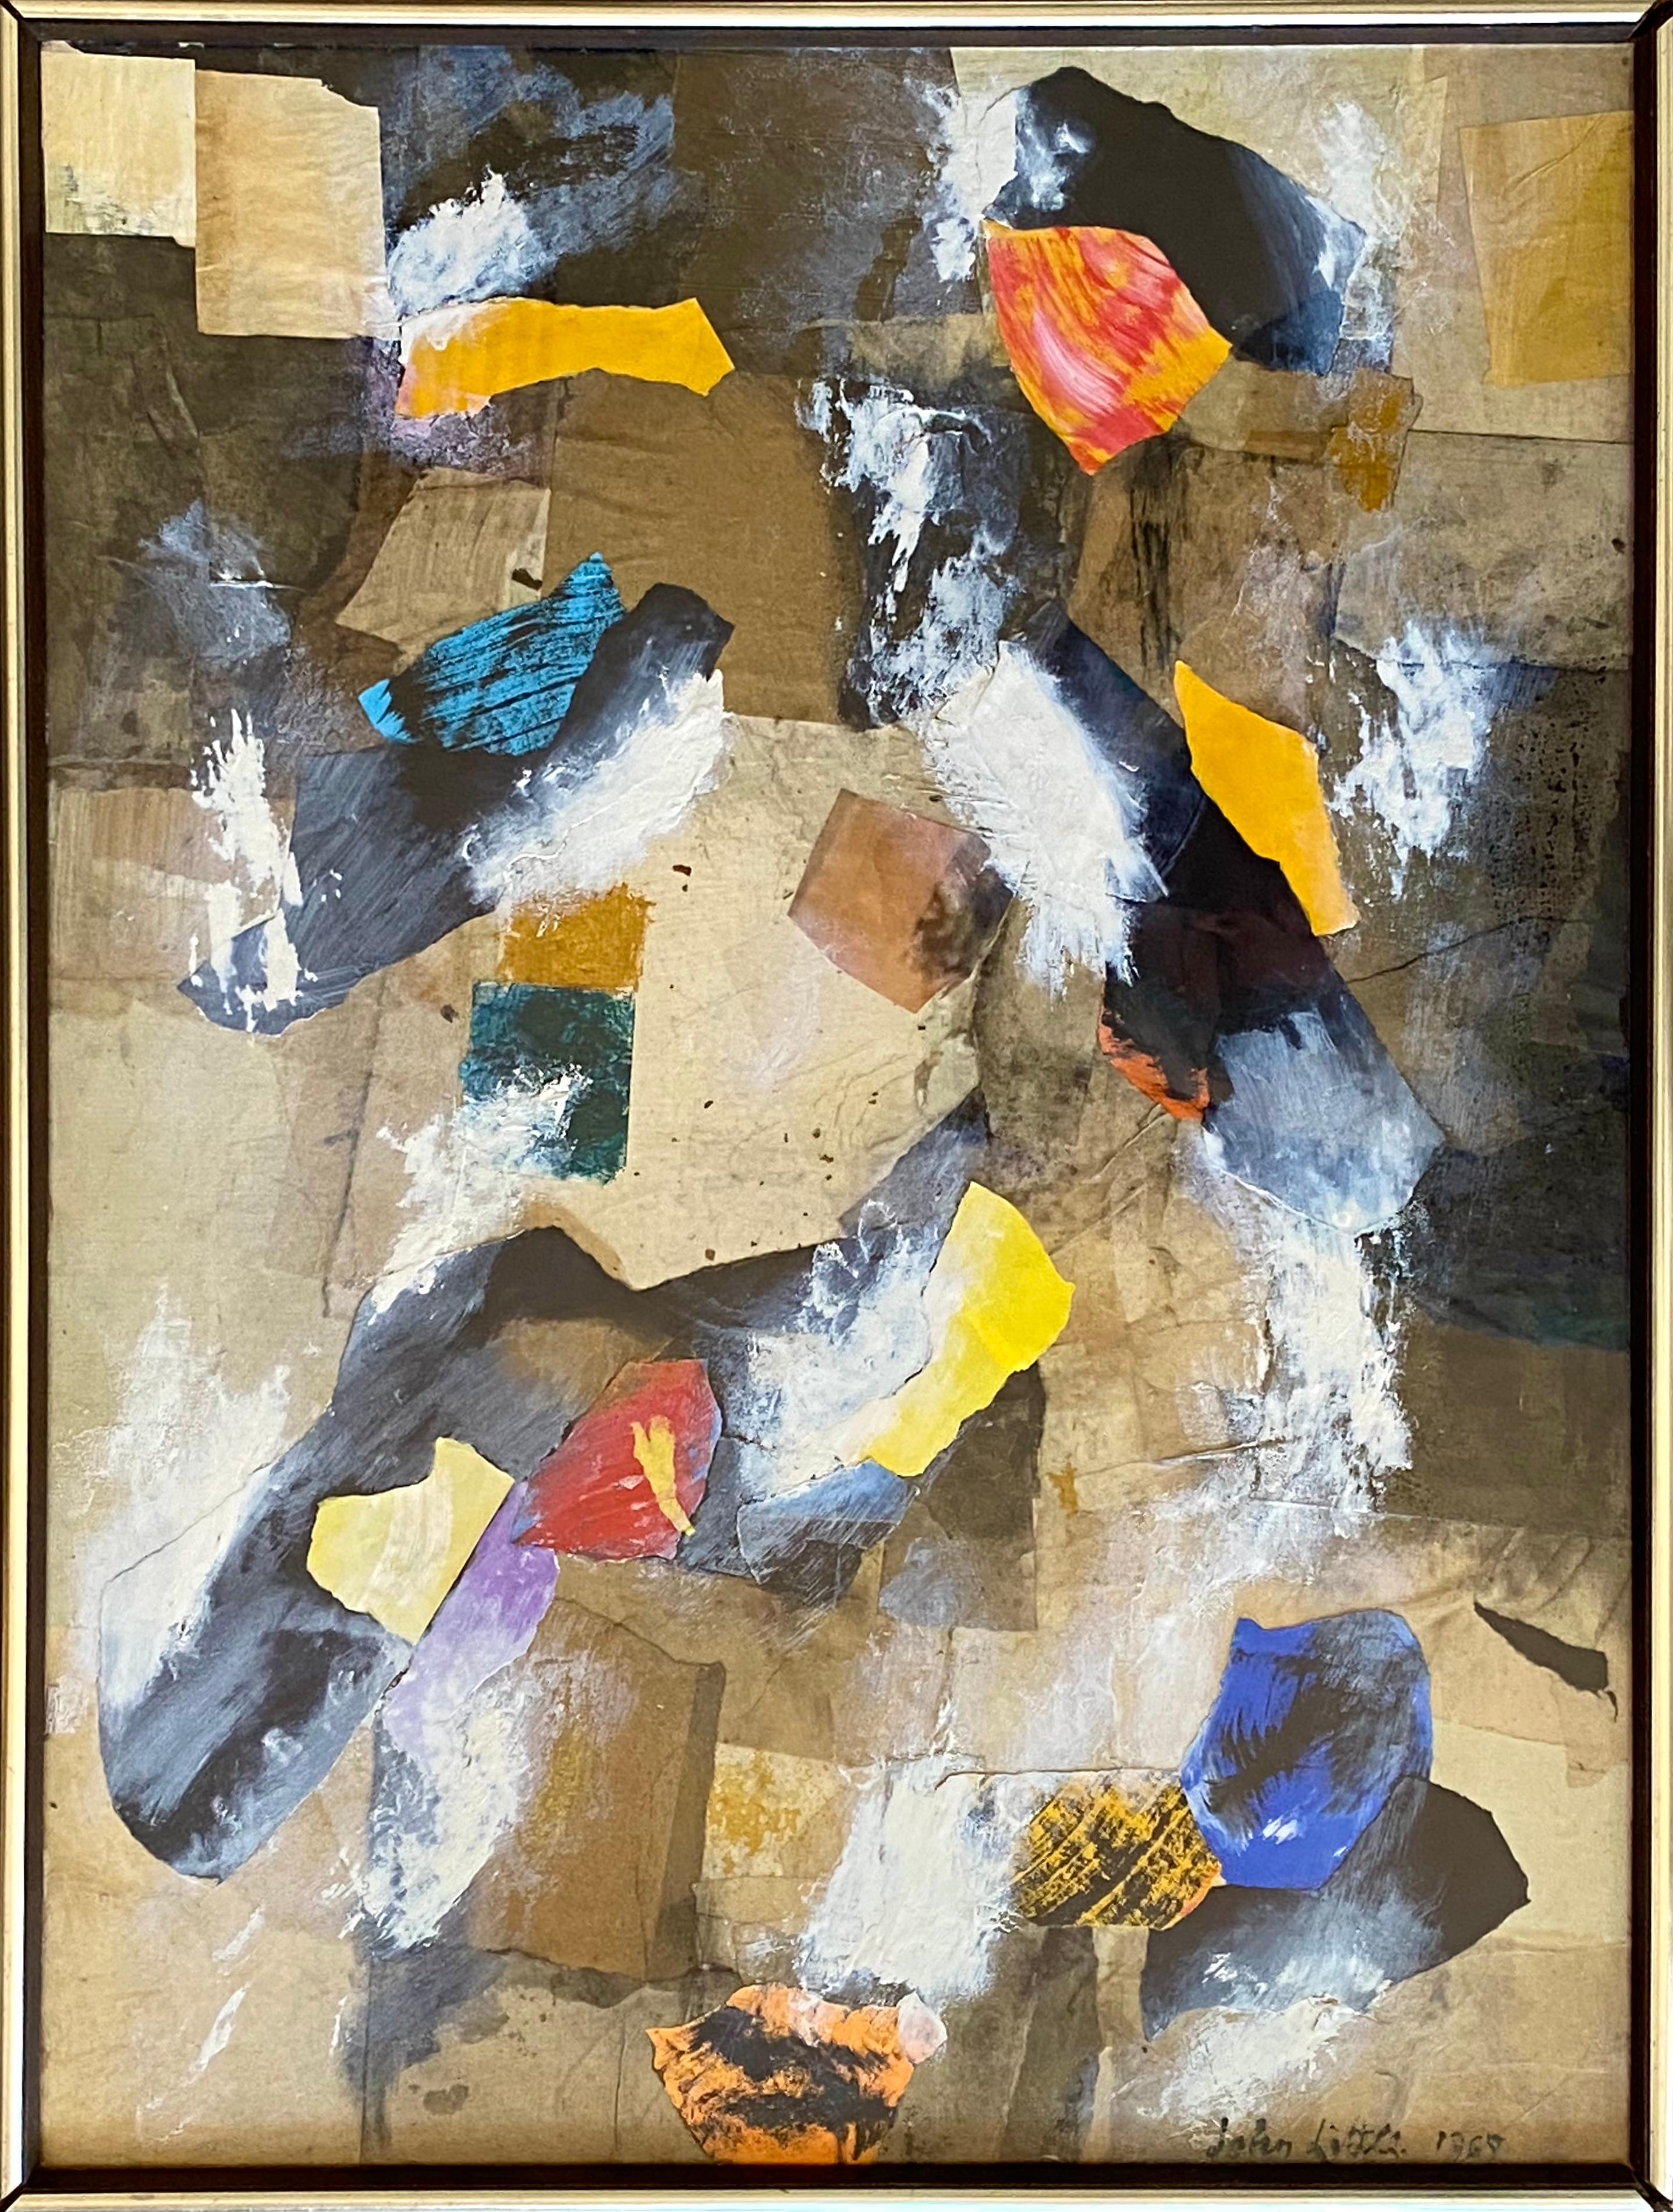 “Abstract Collage” - Painting by John Little